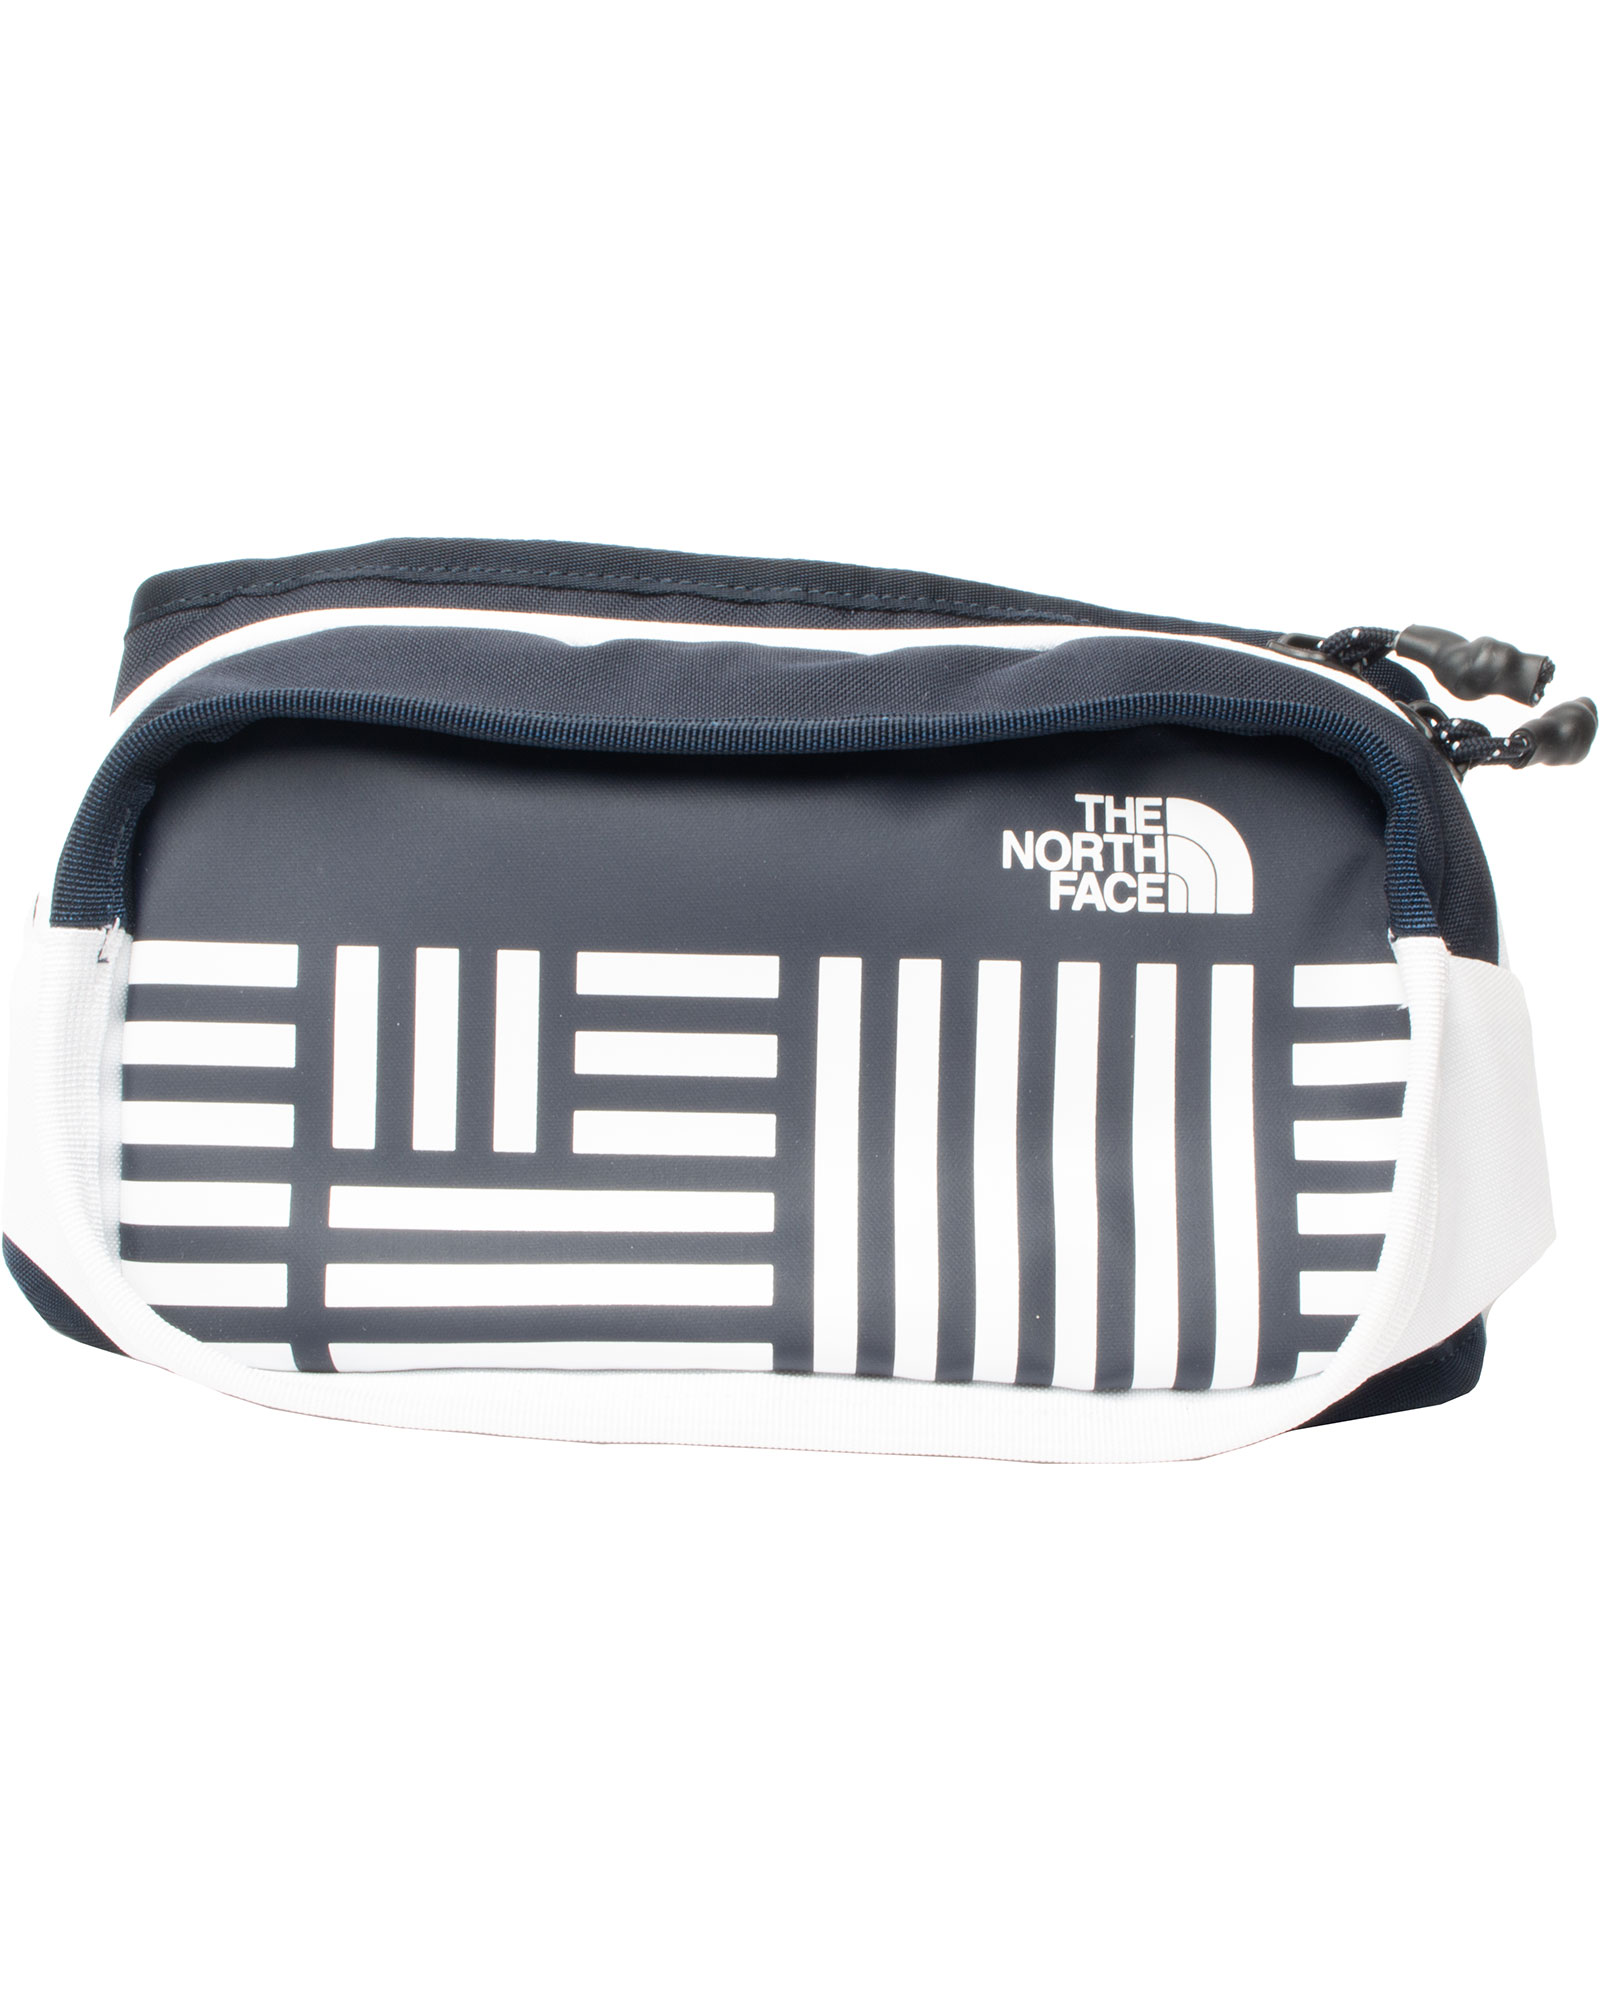 The North Face IC Hip Pack - Aviator Navy/TNF White